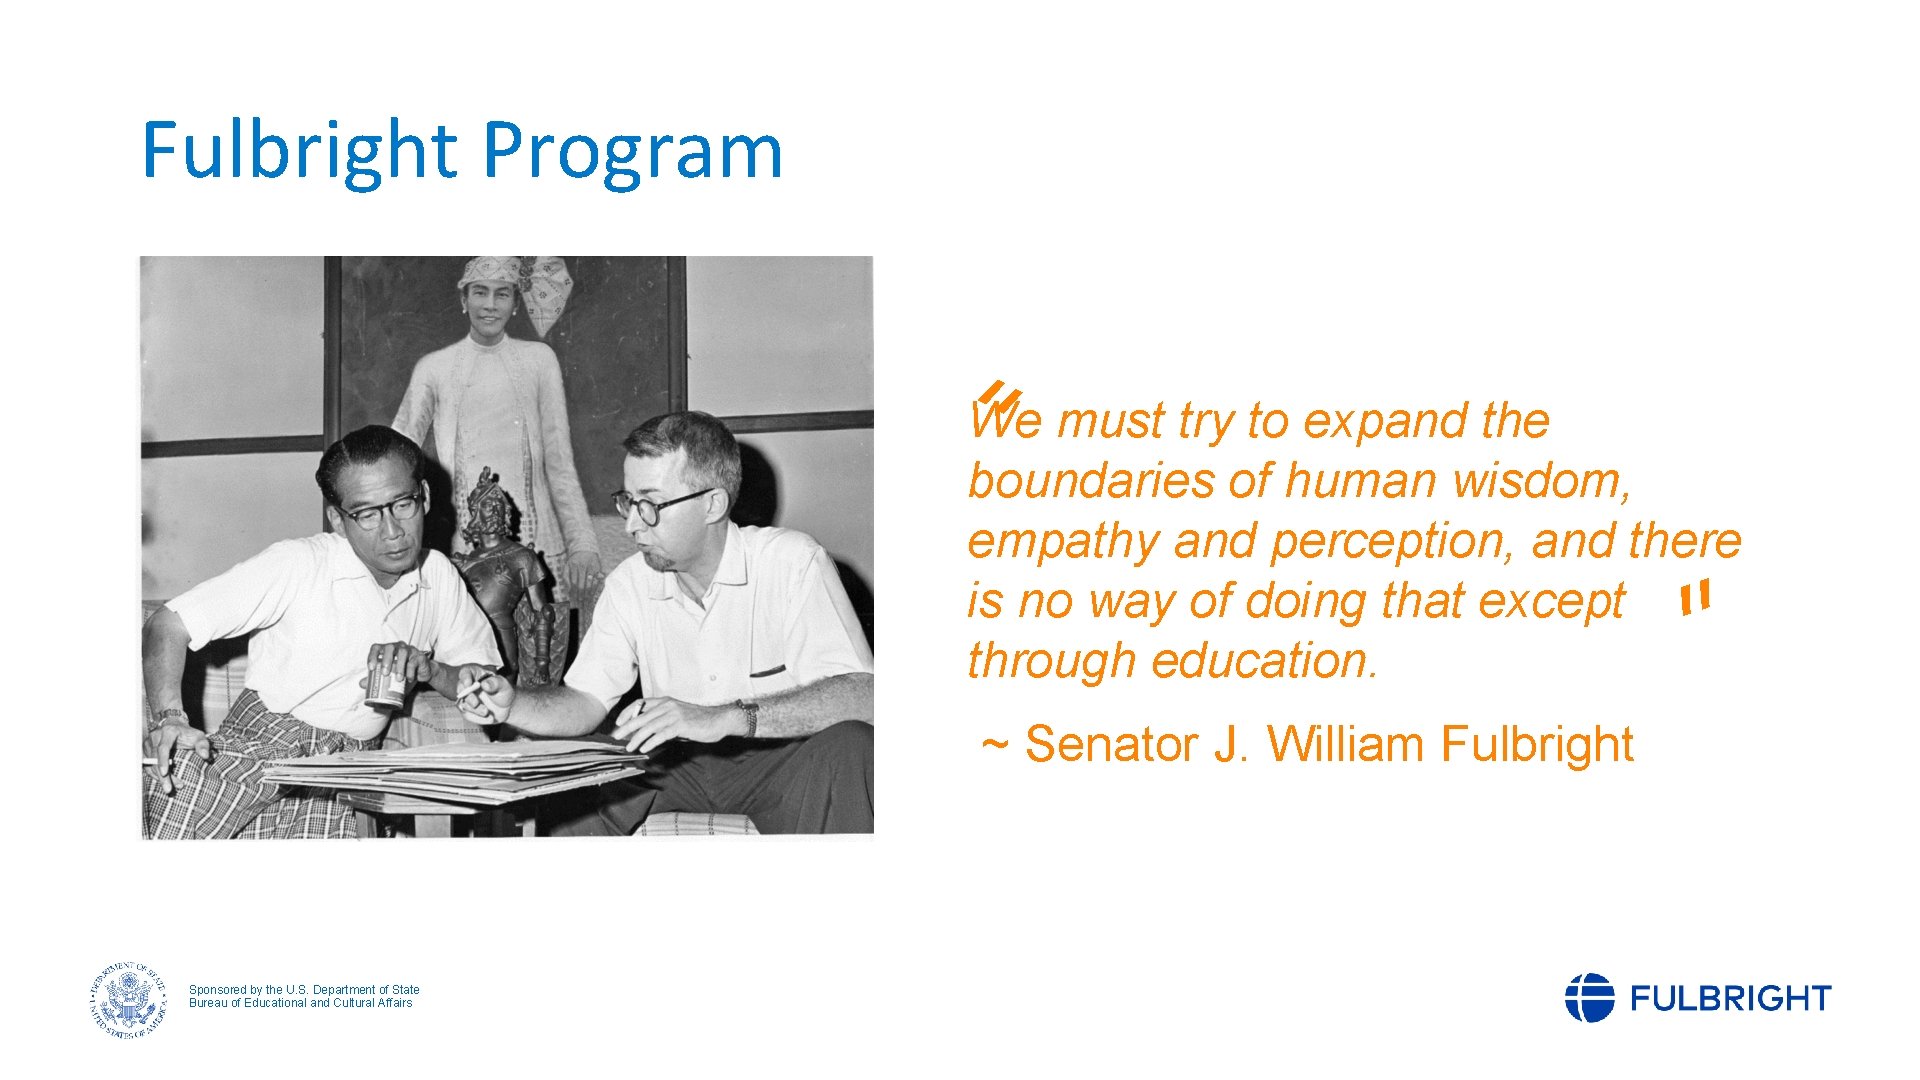 Fulbright Program “We must try to expand the boundaries of human wisdom, empathy and